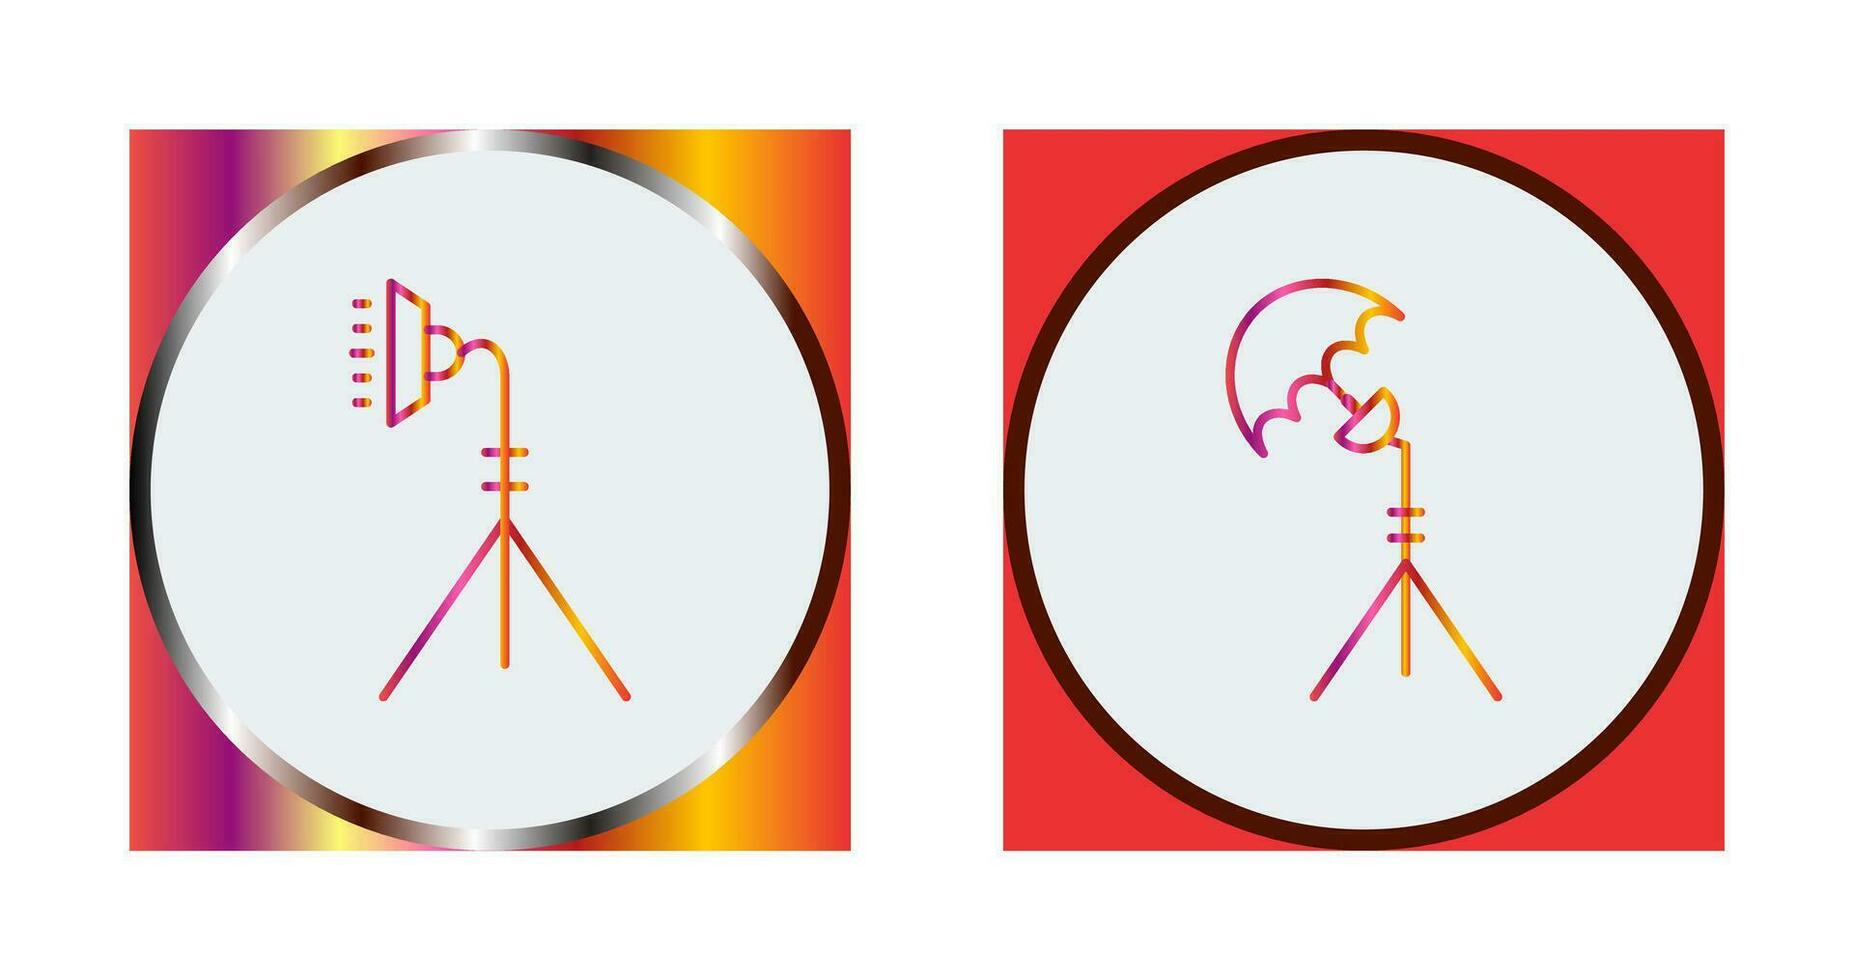 light stand and studio Icon vector